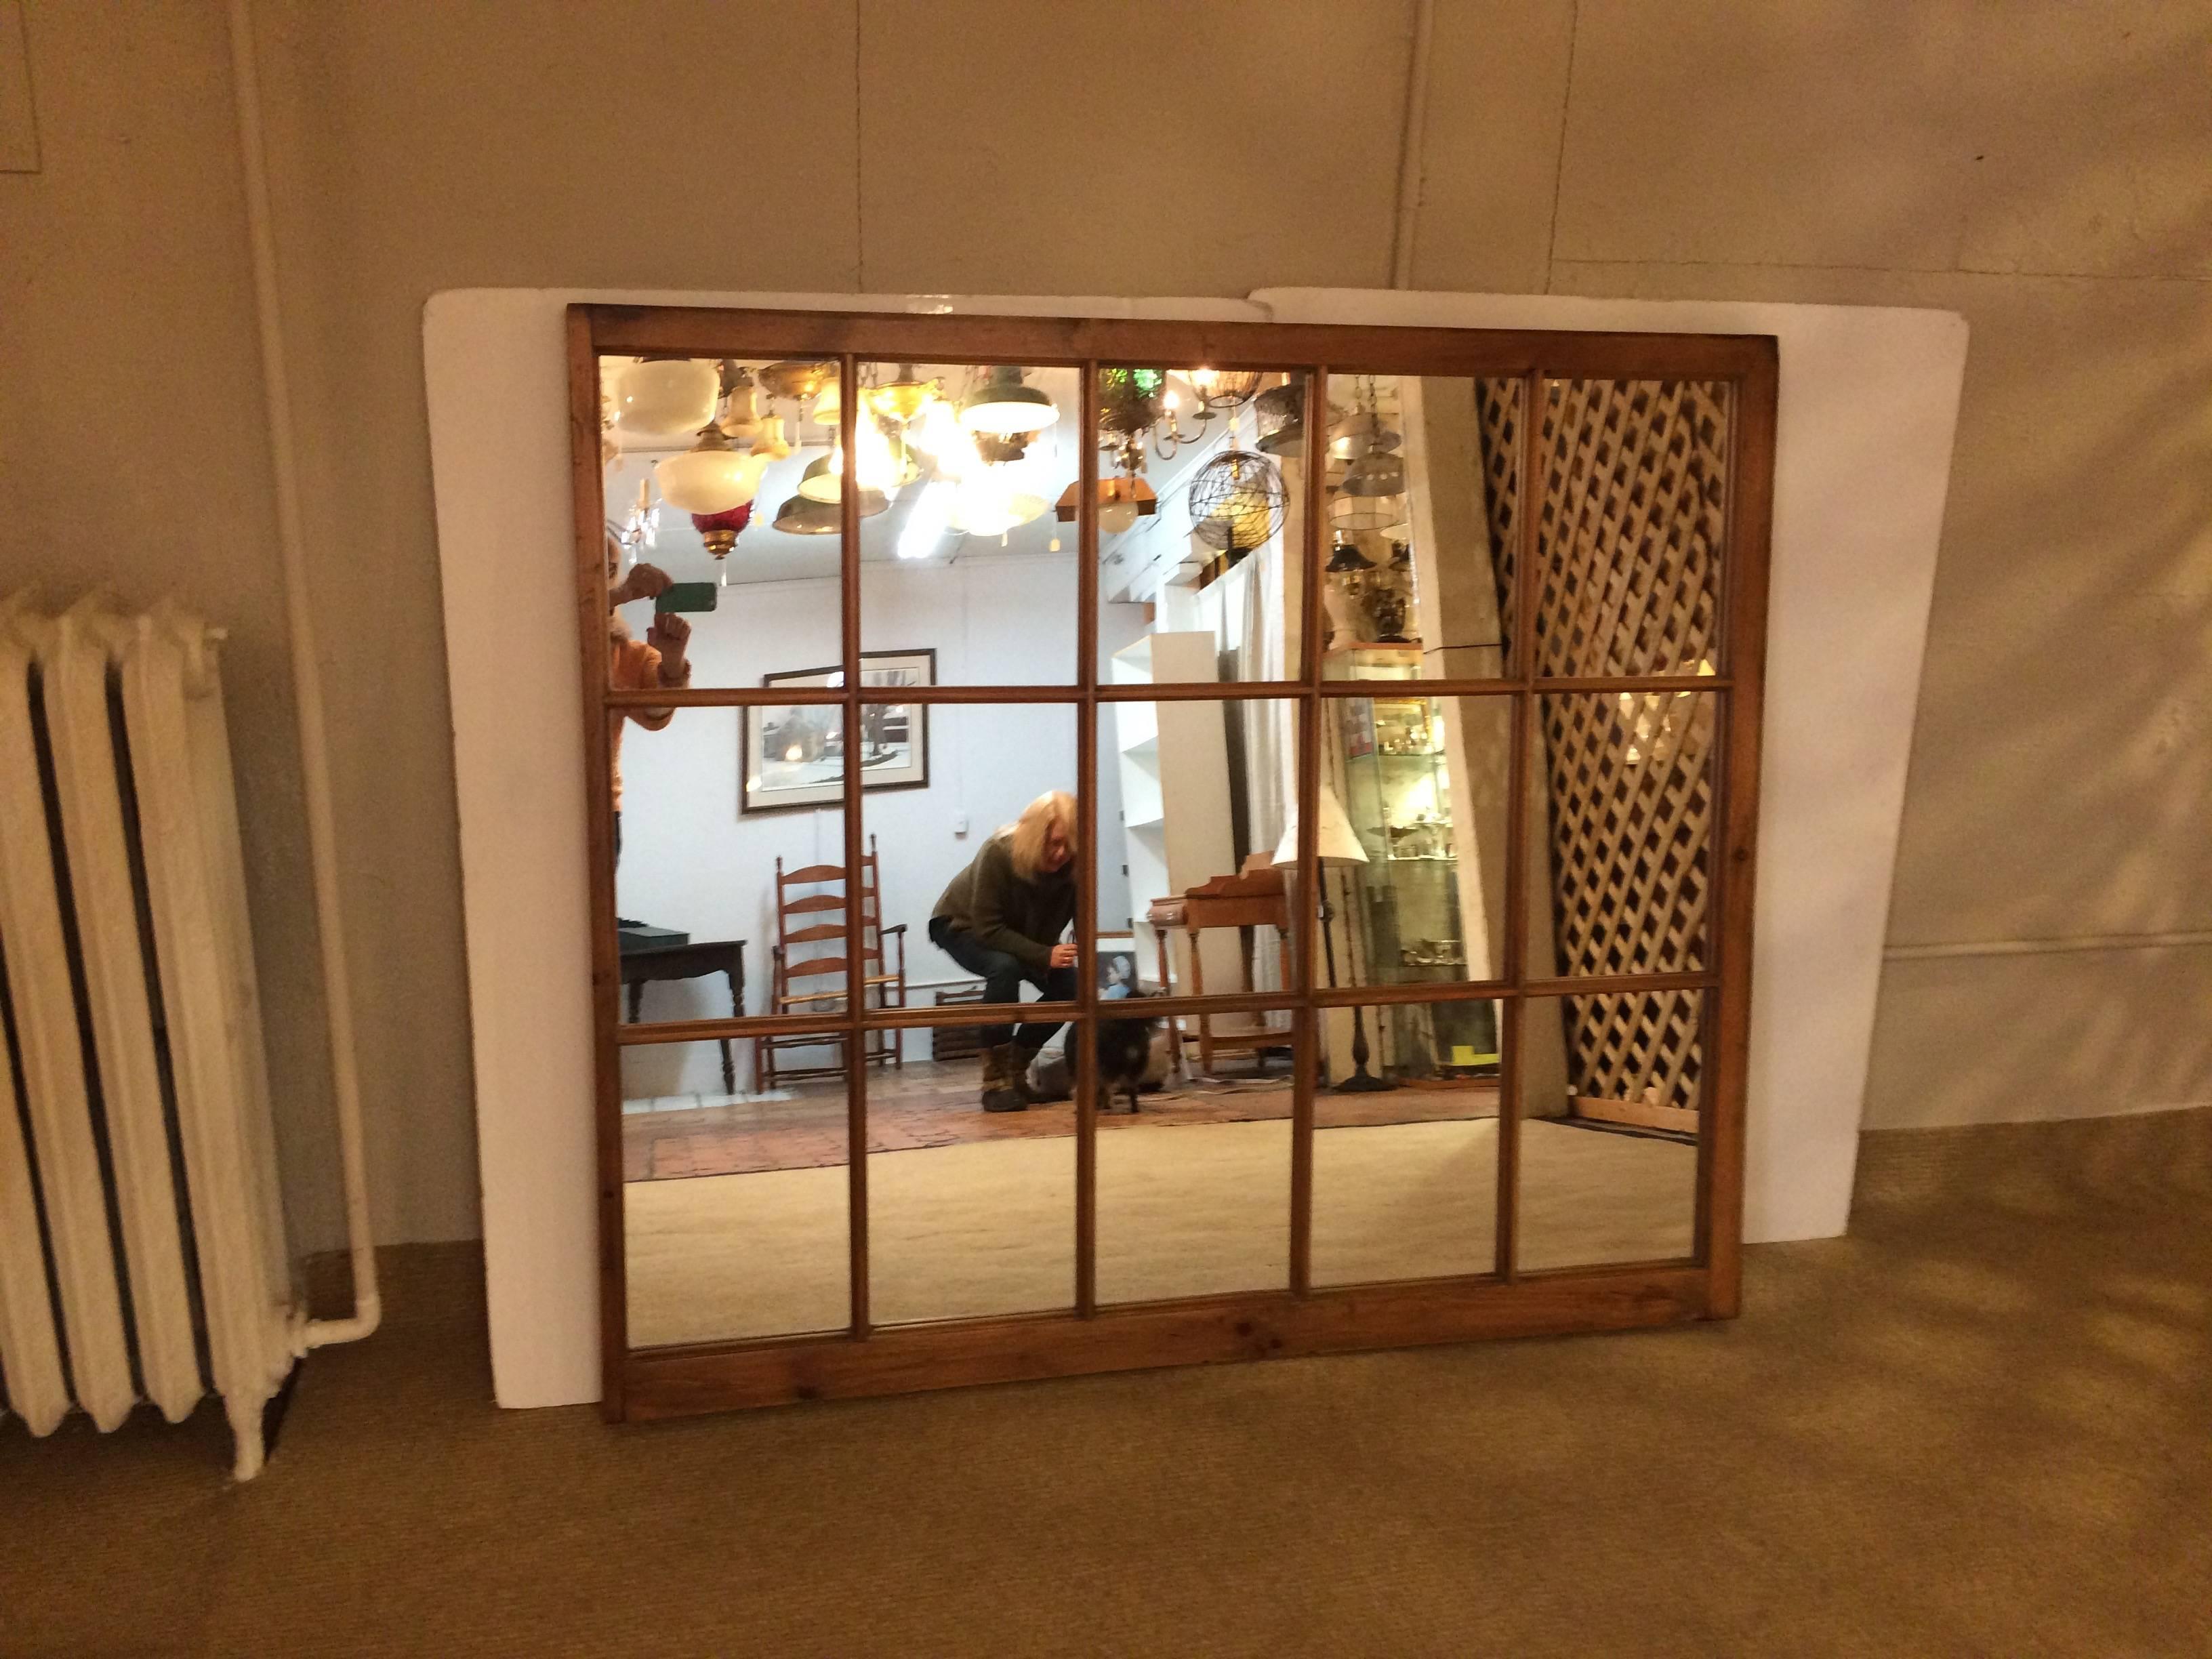 Handsome very large antique pine window that's been transformed into a striking architectural mirror. Can be hung vertically or horizontally.